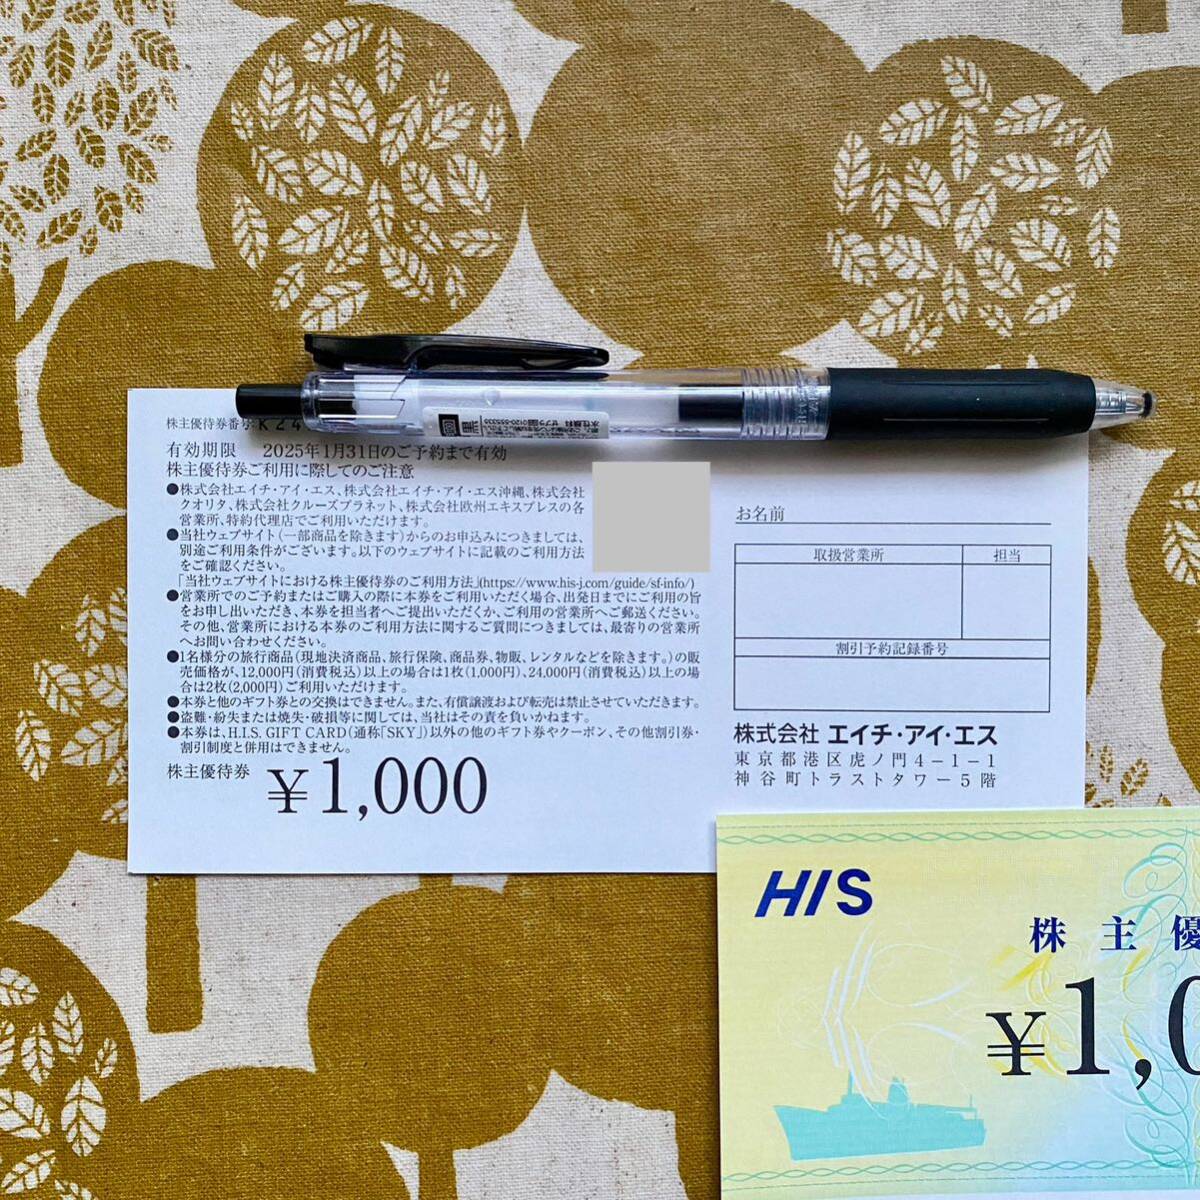 [ newest * super speed shipping ]HIS H I es stockholder complimentary ticket 1,000 jpy minute coupon ticket discount ticket traveling abroad domestic travel Tour air ticket lodging hotel code notification 